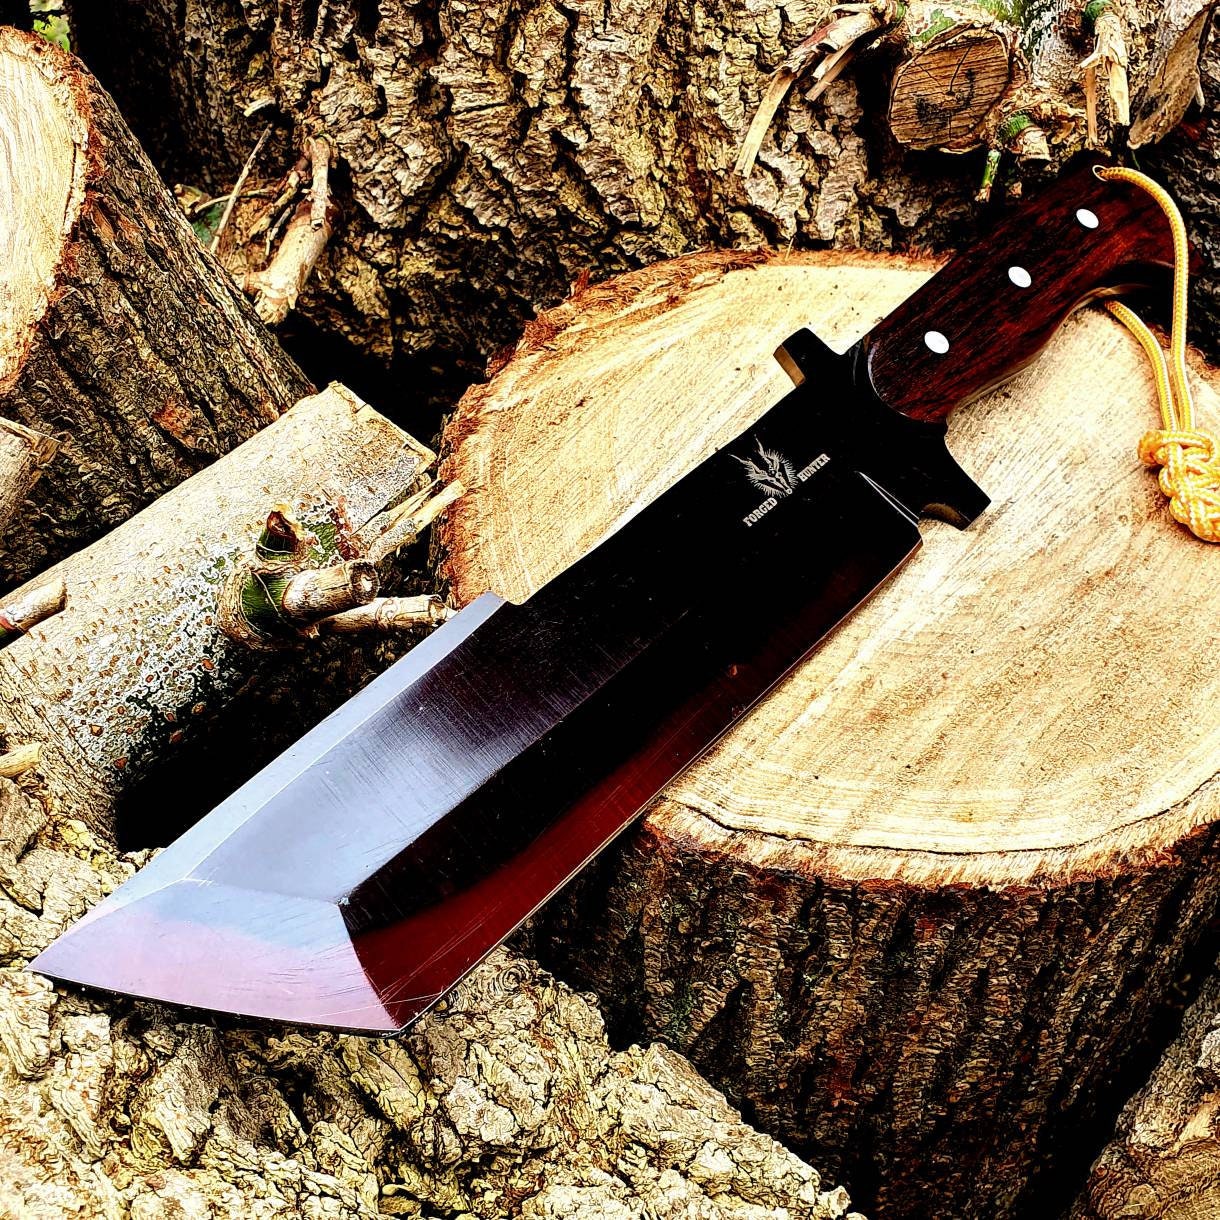 Forged Knife Multi-use 4inch Handmade High Carbon Steel Mongolia hunt  Camping knife Fruit Outdoor Knife Barbecue Butcher Knife